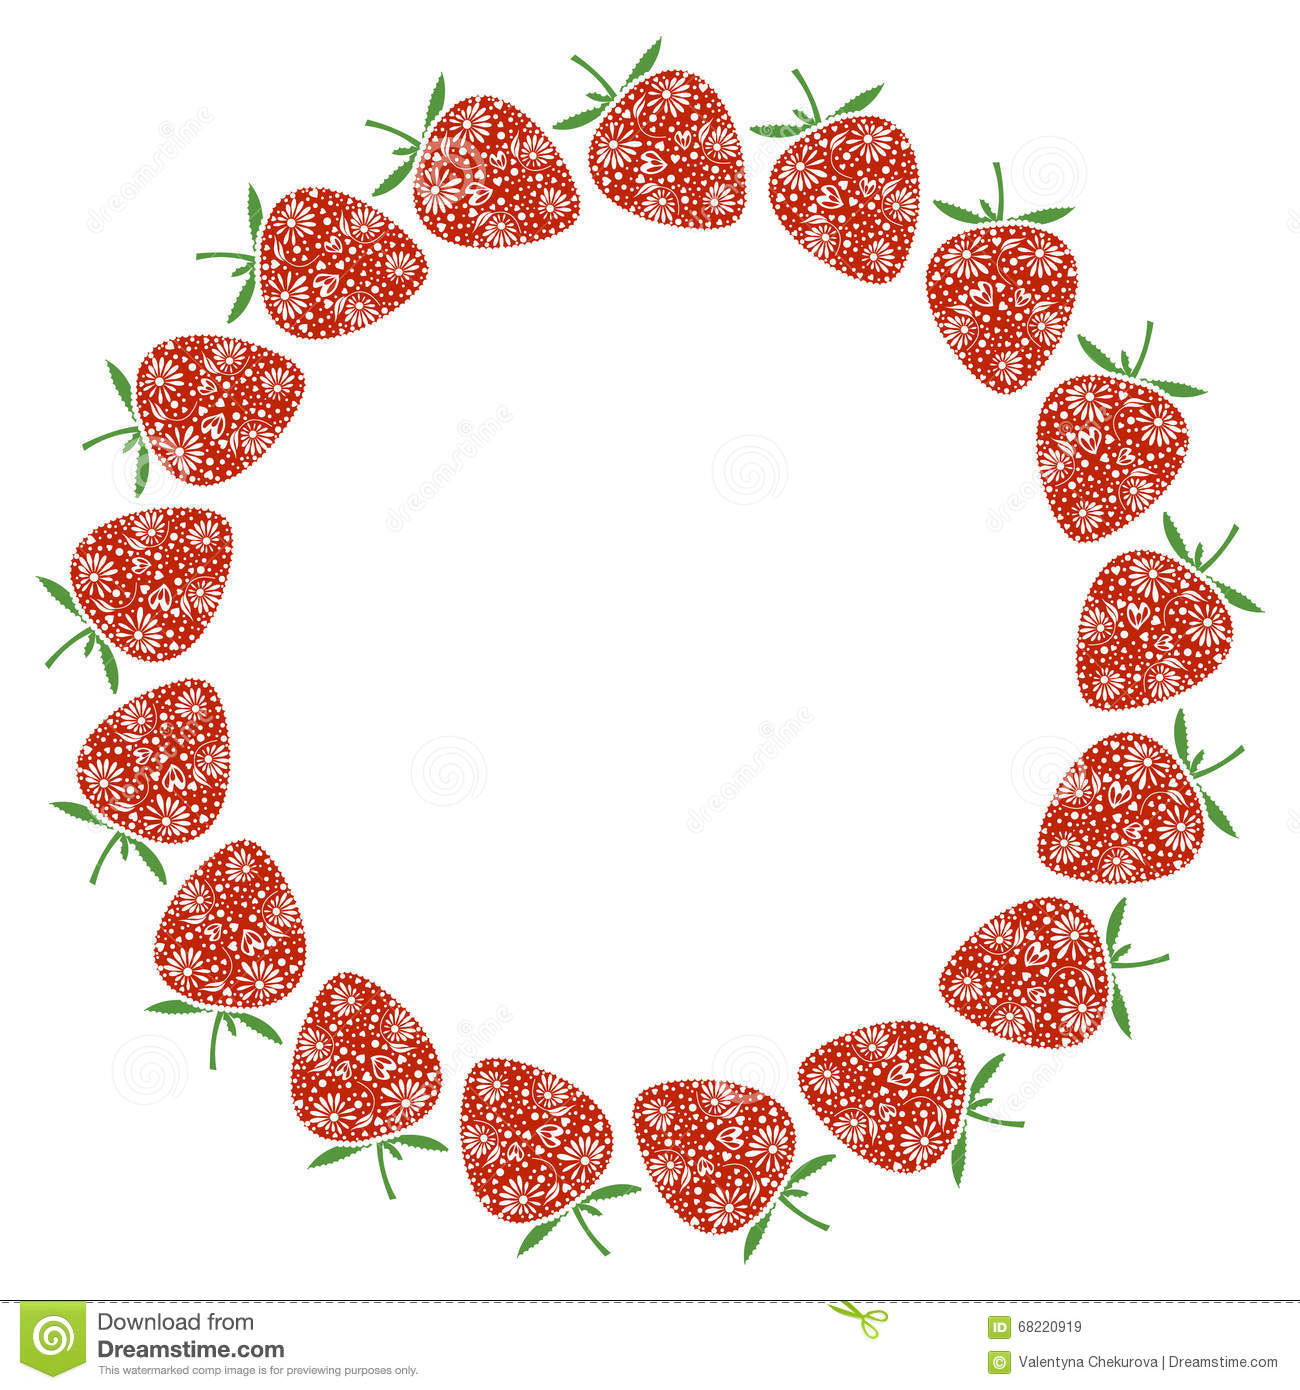 Vector Card With Berries. Empty Round Form With Ornamental.